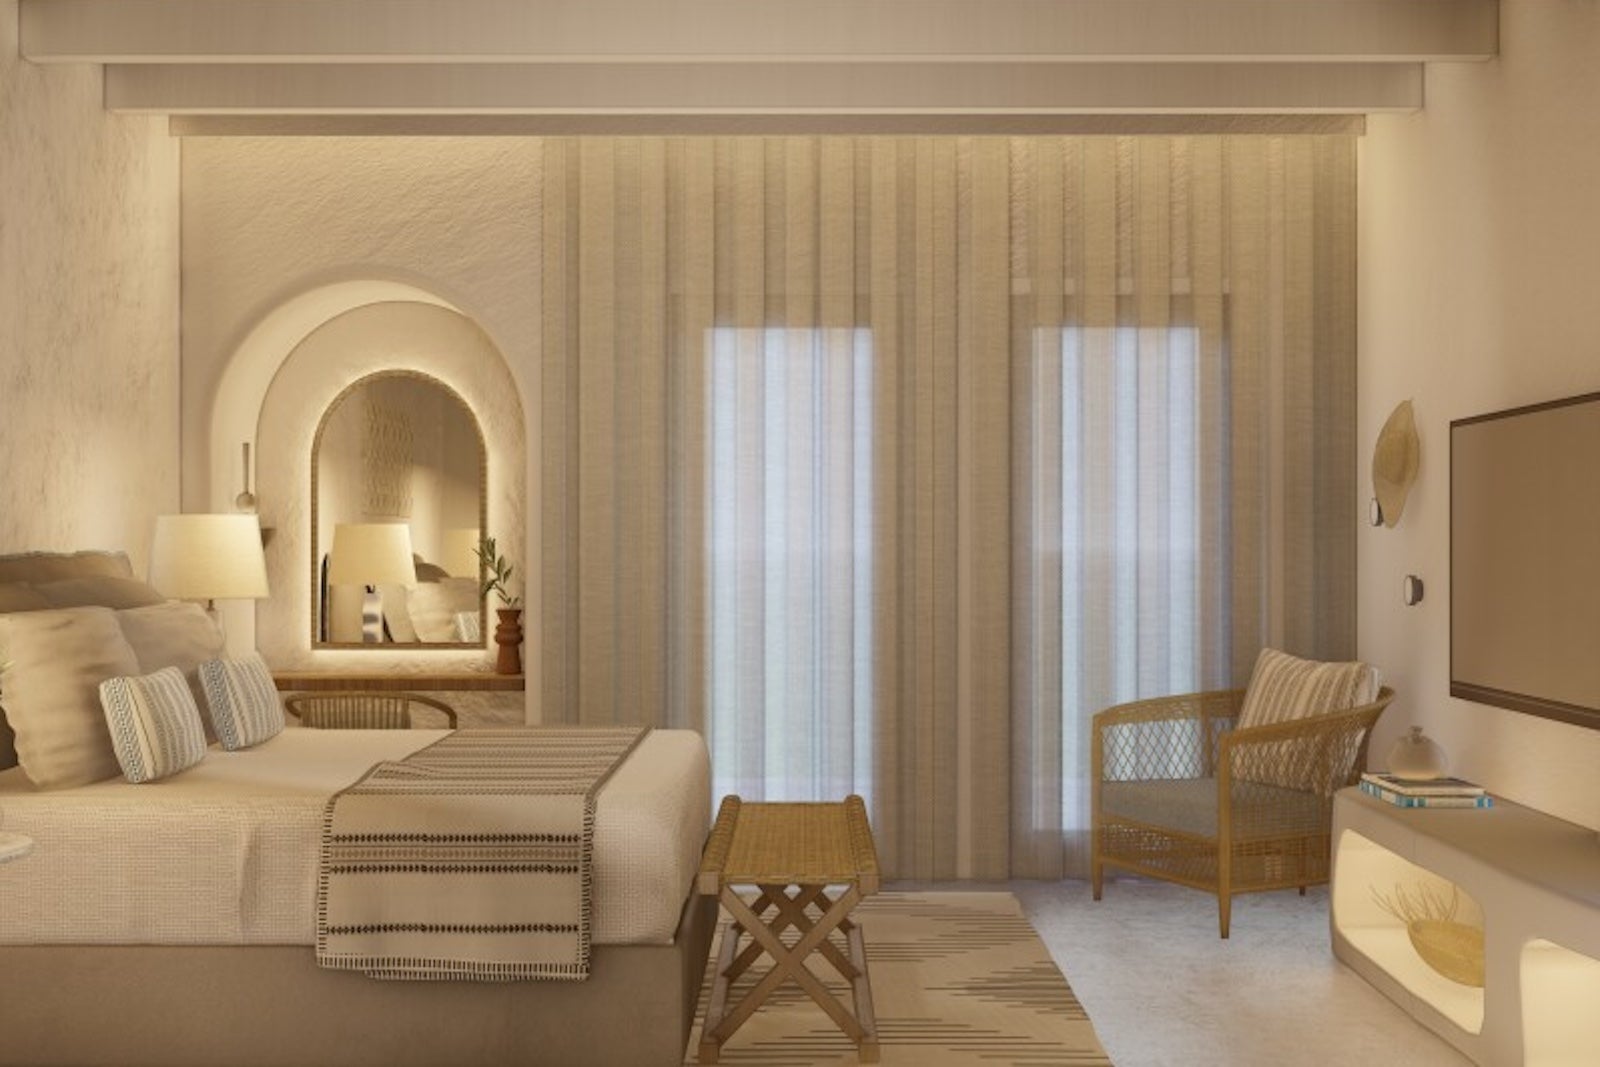 Marriott is opening a resort on the Greek island of Patmos